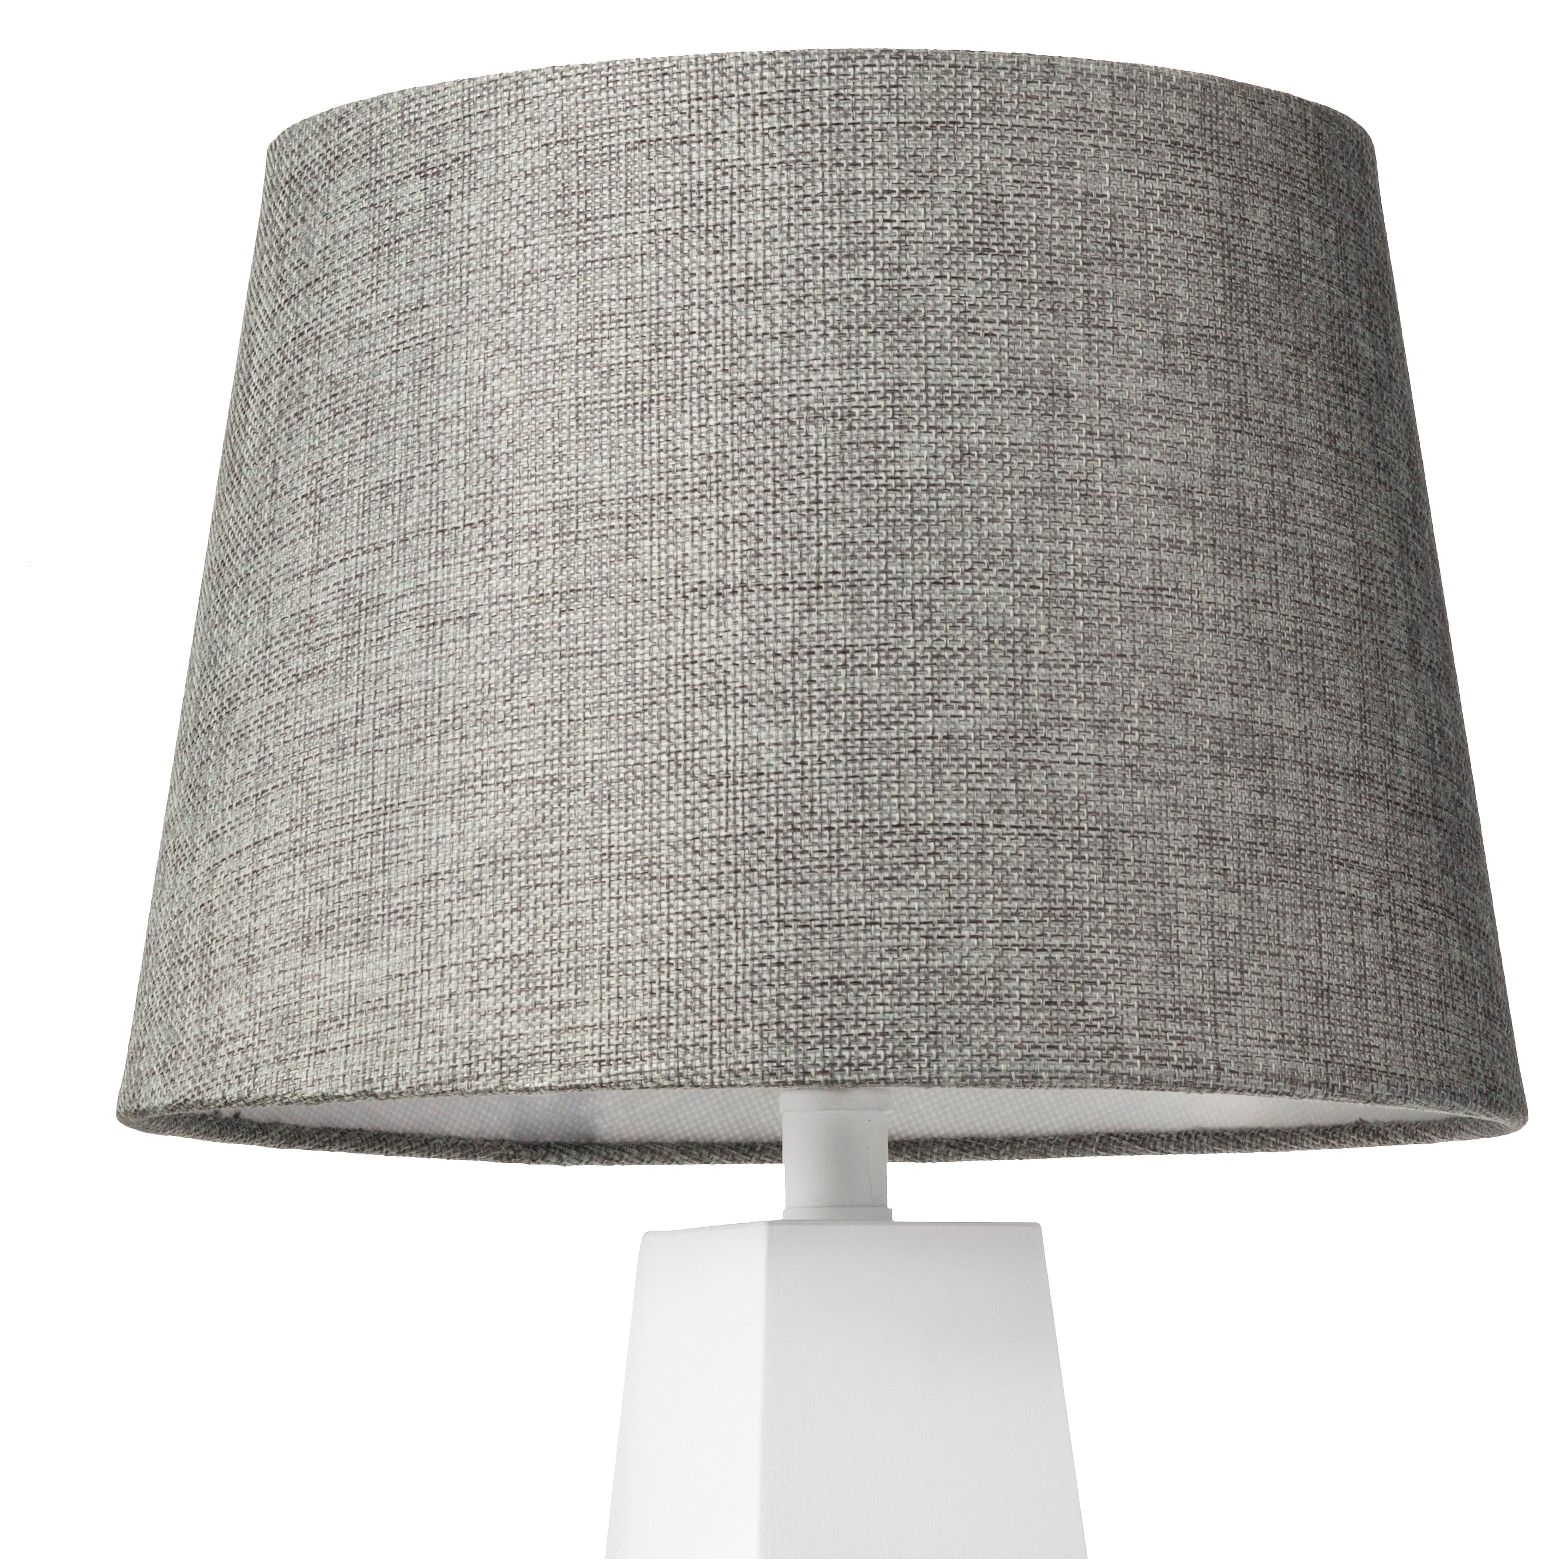 cast a warm inviting glow in any space with this linen lampshade from thresholda¢ the natural looking texture and soft gray hue of this small lampshade